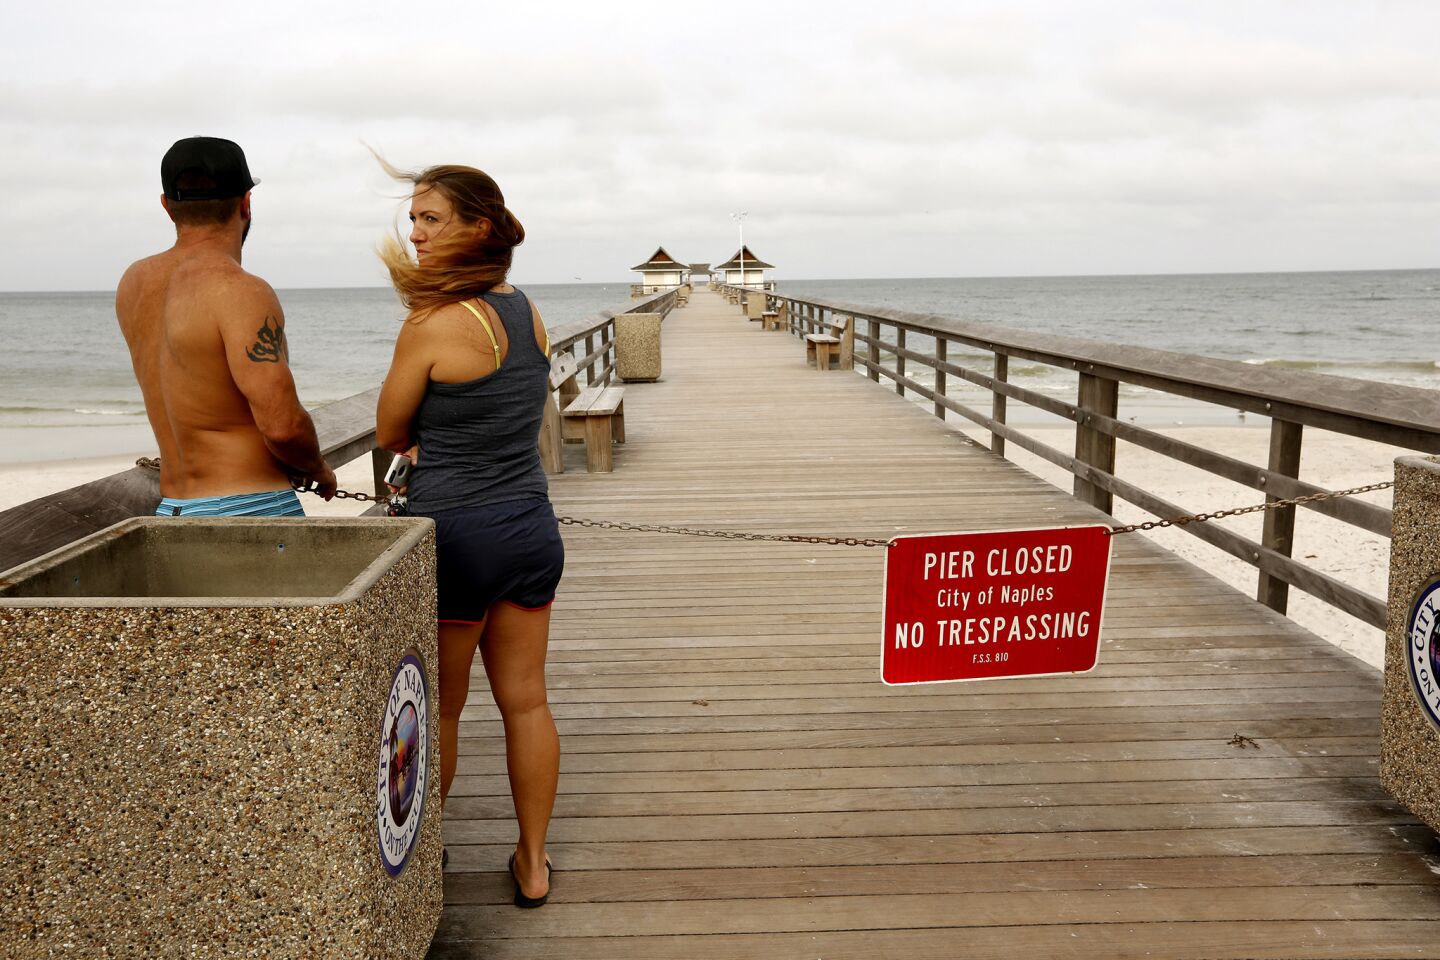 Sherri Bourdo, 32, and Anthony Guidry, 40, look out over the water in Naples, Fla, in advance of the arrival of Hurricane Irma.